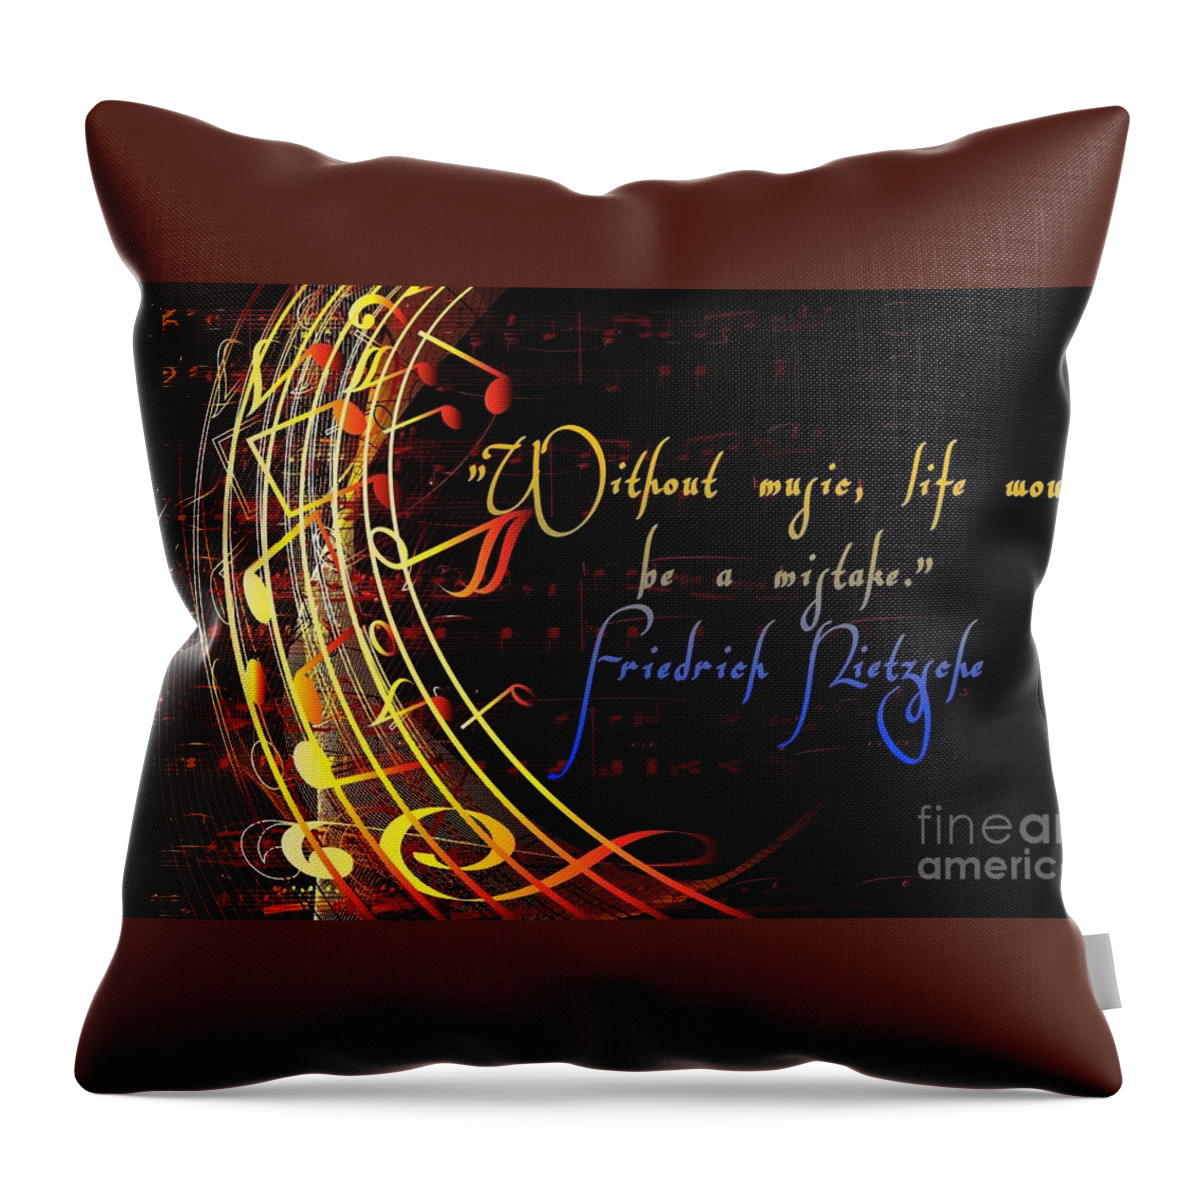 Inspirational Throw Pillow featuring the mixed media Without Music by Claudia Zahnd-Prezioso